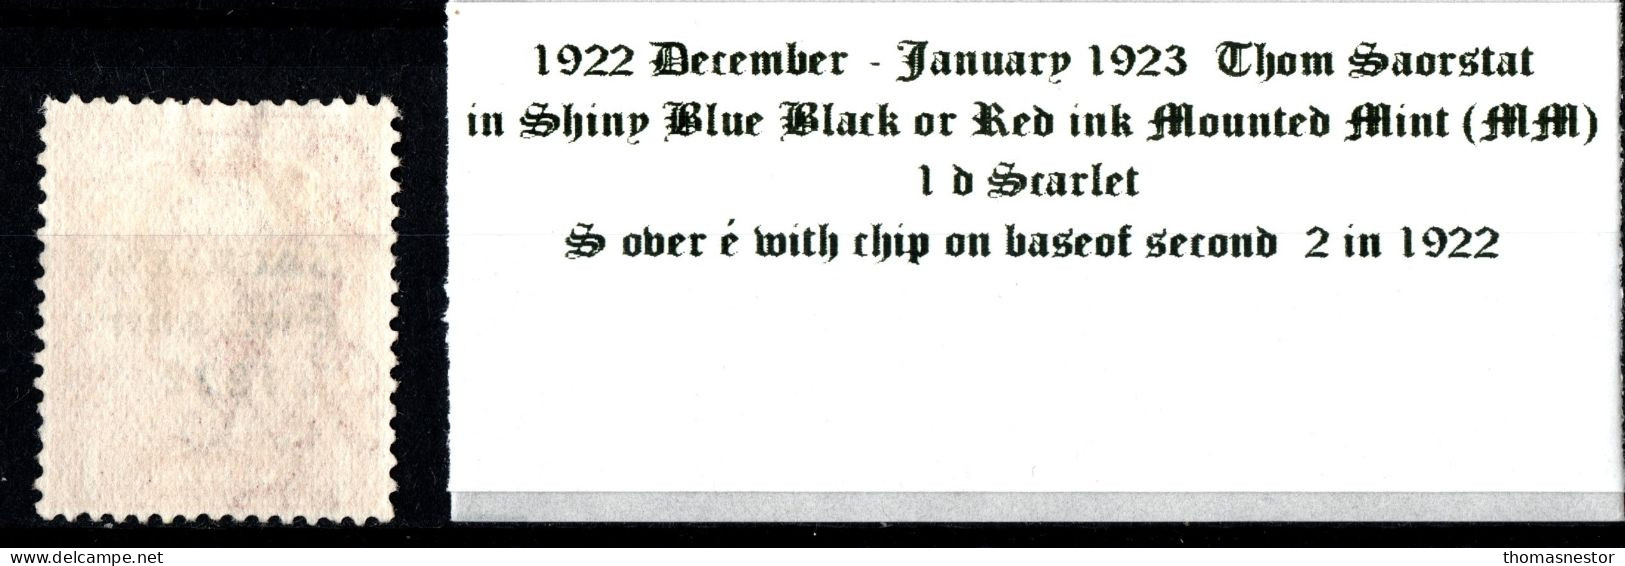 1922 - 1923 Dec-Jan Thom Saorstát In Shiny Blue Black Or Red Ink With S Over é, 1 D Scarlet, Mounted Mint (MM) - Ungebraucht